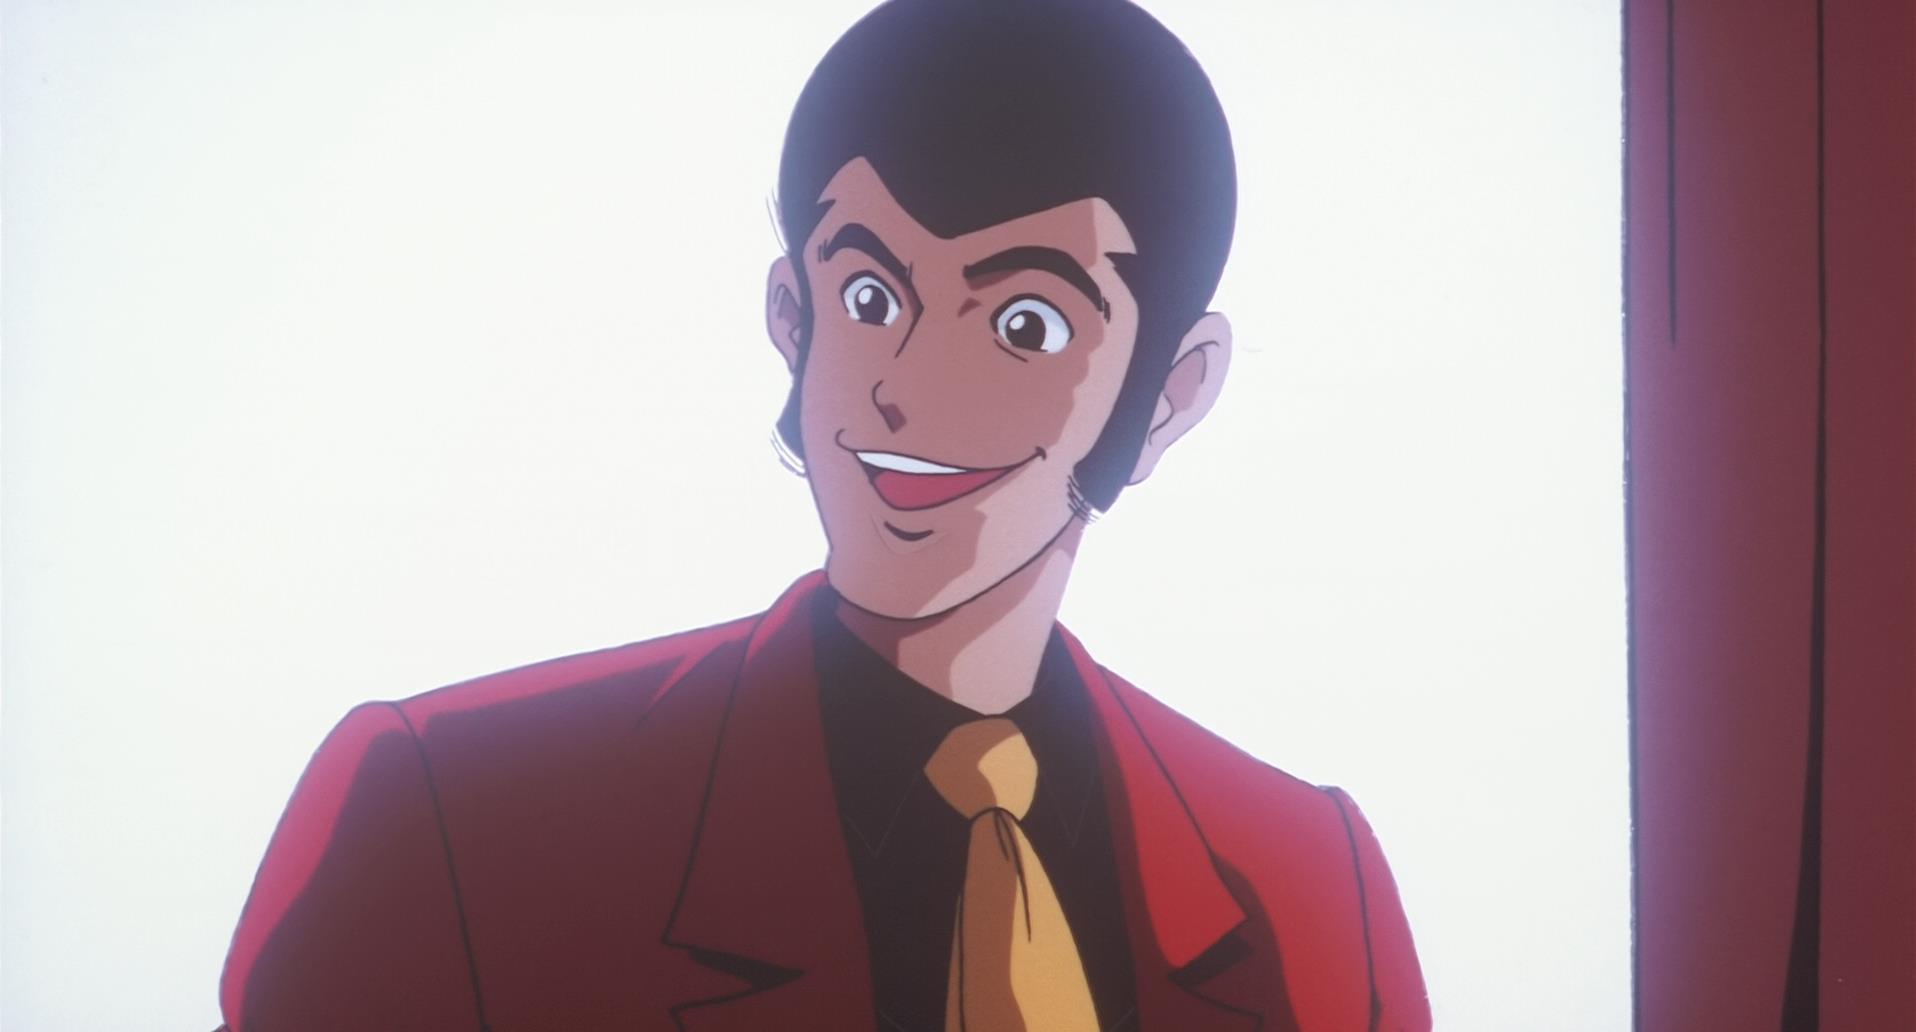 Lupin III: Dead or Alive (Anime) - TV Tropes